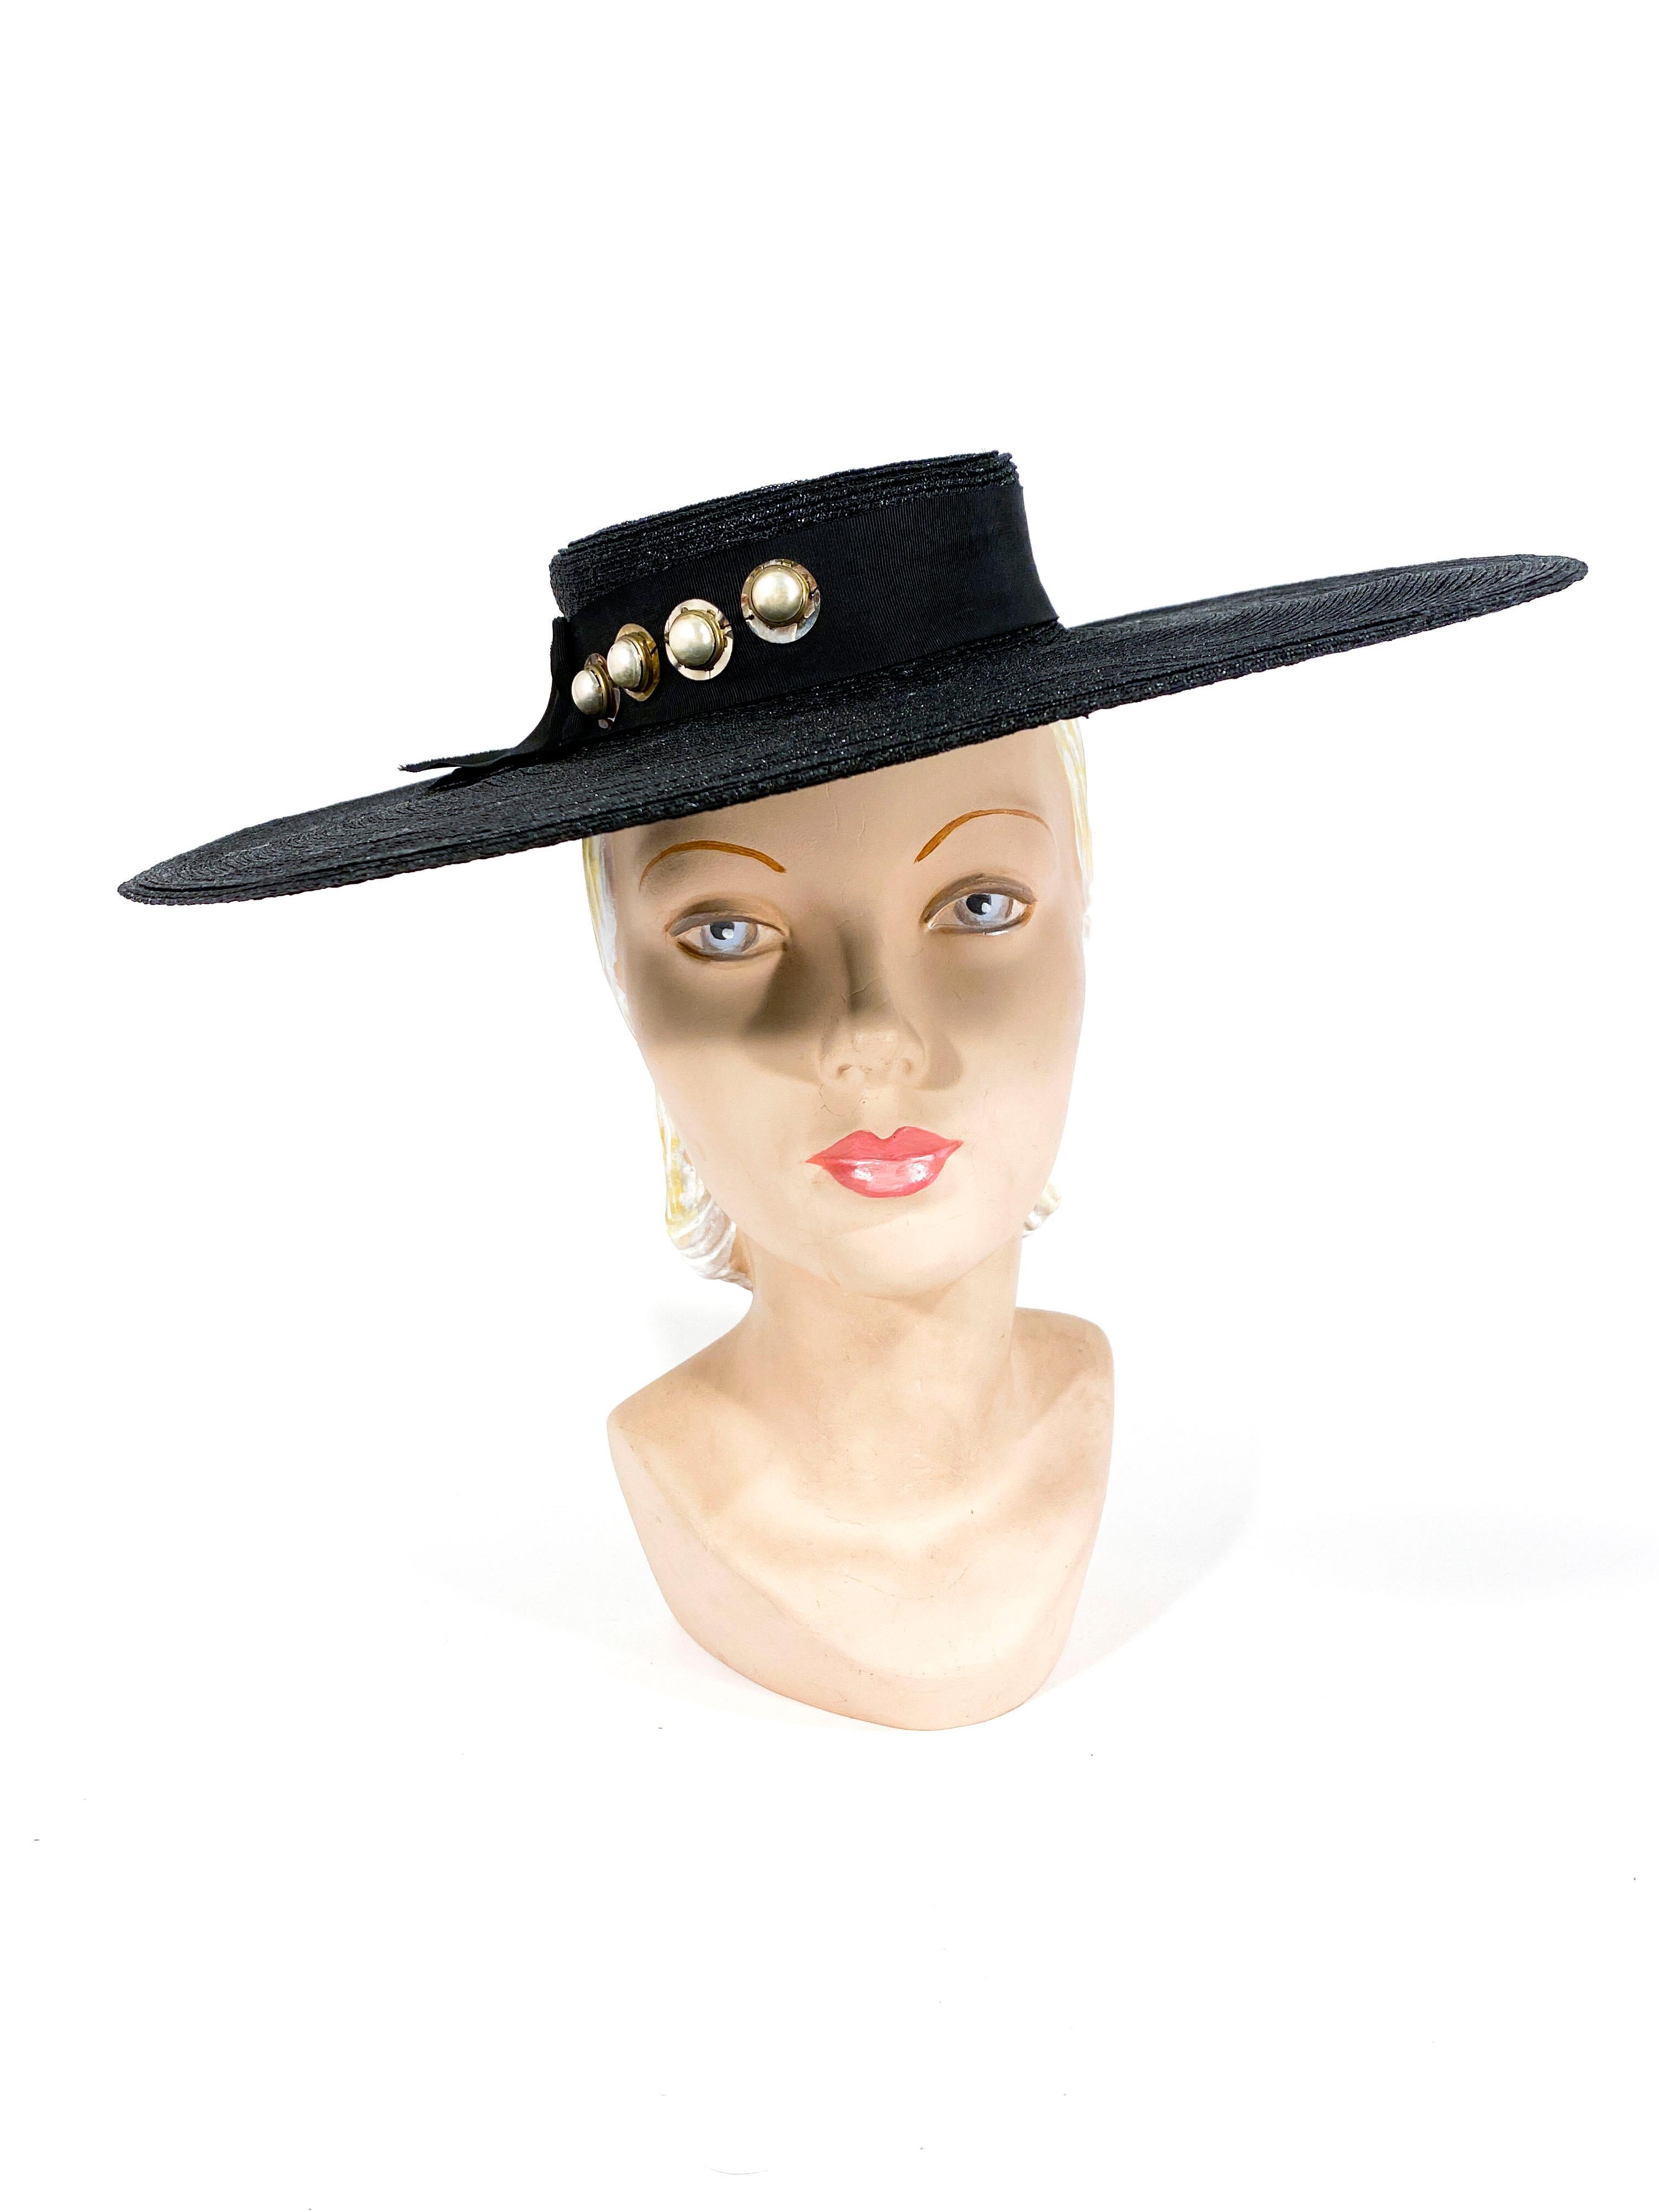 1930s black saucer hat made of a coated and woven straw. The wide-brim is wide, structured, and stiff. The shallow crown is hand sculptured and adorned with a grosgrain hat band. The band itself is decorated with large sequin and pearl buttons.